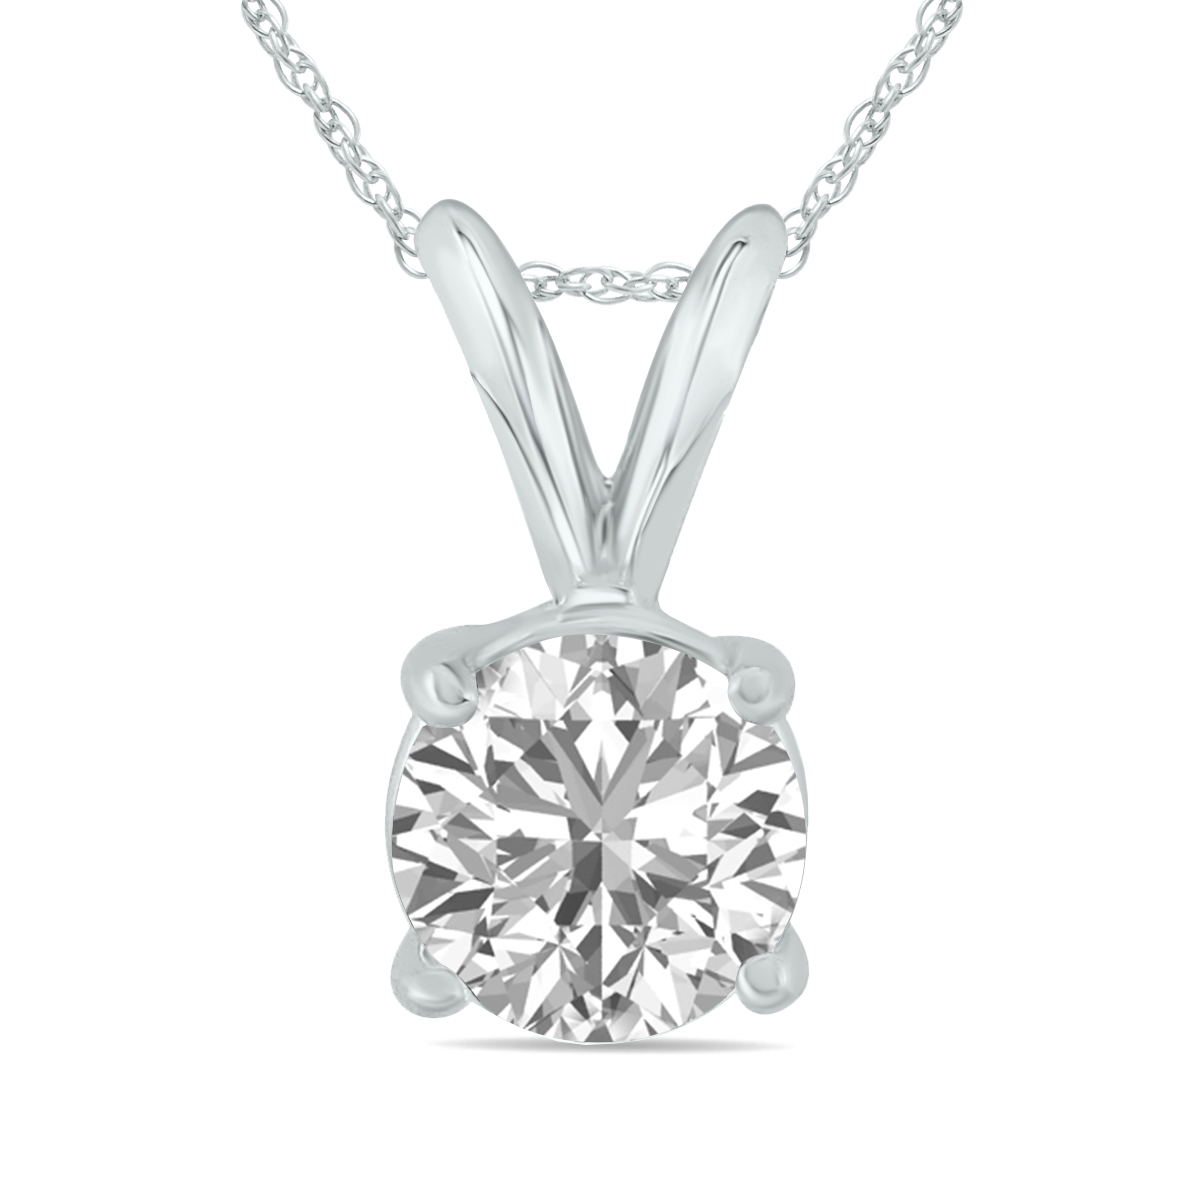 Image of IGI Certified Lab Grown 1 Carat Diamond Solitaire Pendant in 14K White Gold (I Color SI2 Clarity)